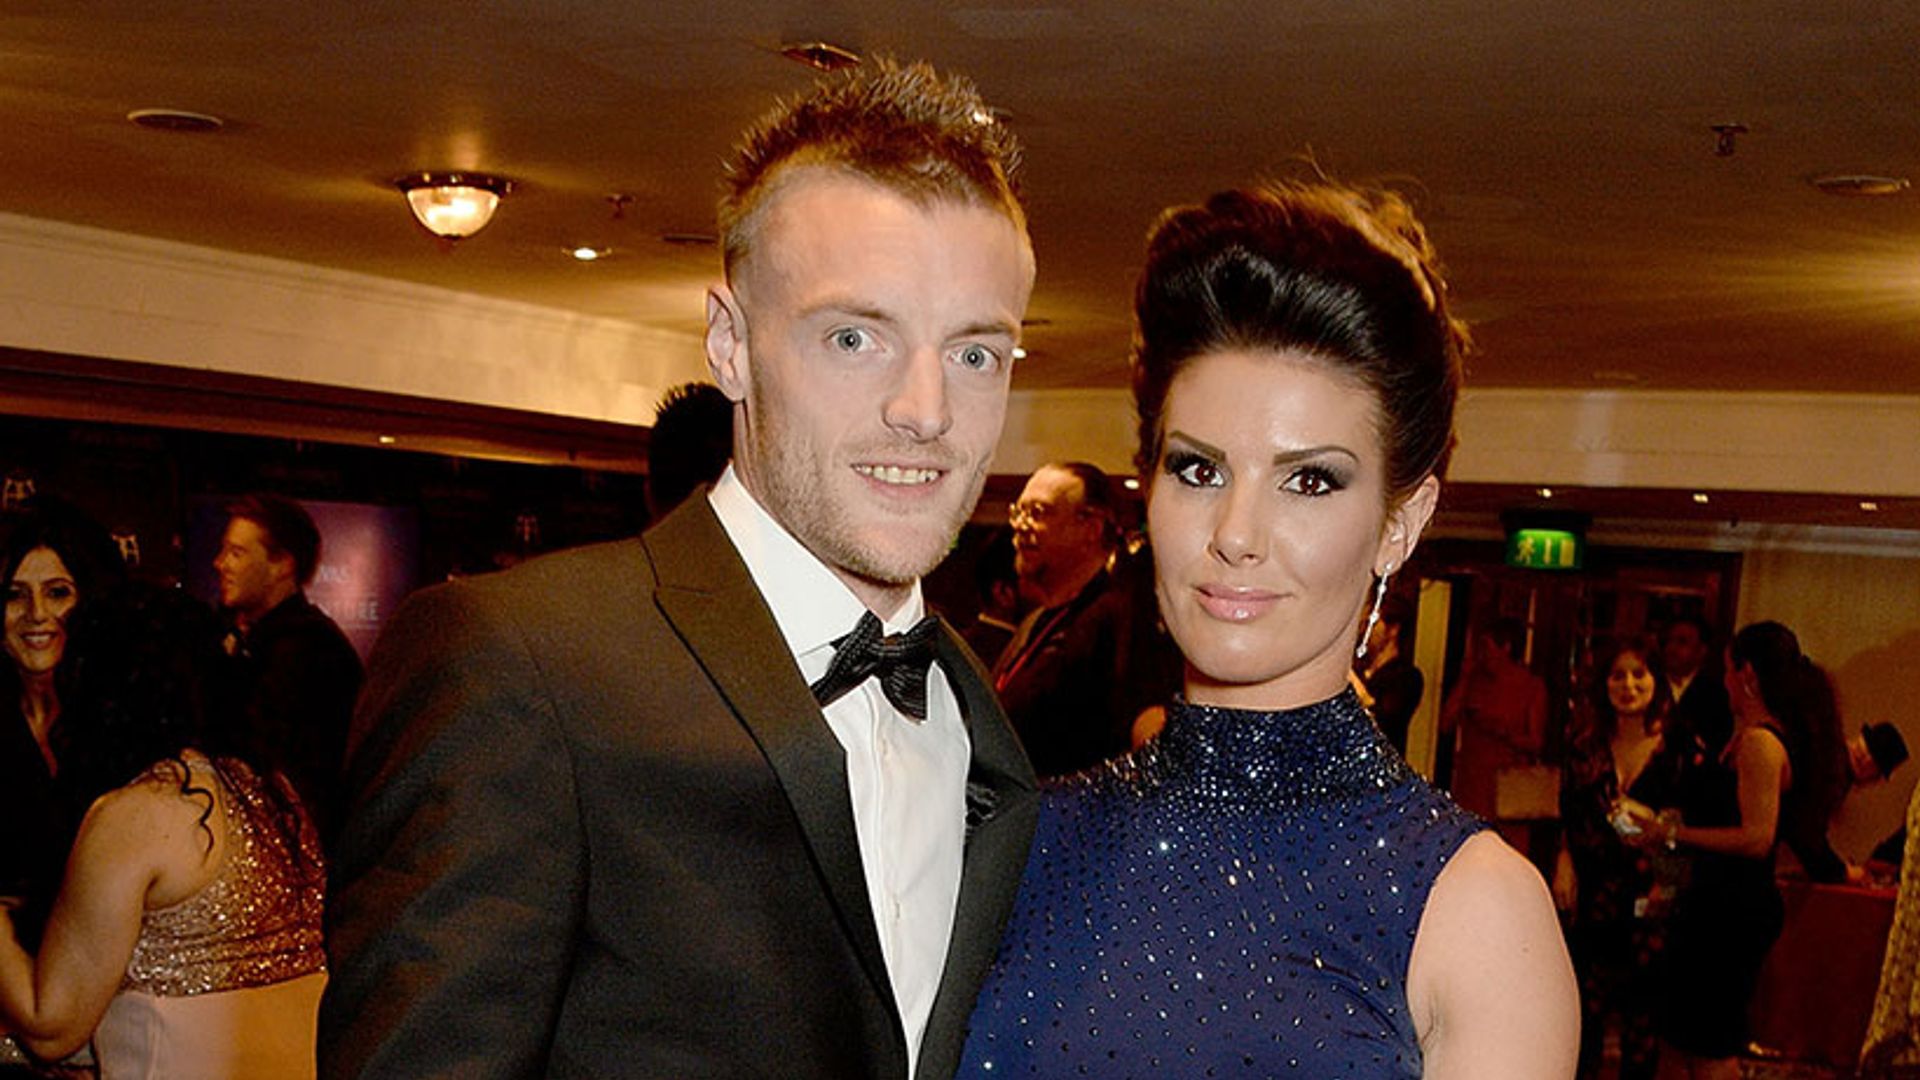 Jamie Vardy and wife Becky expecting their second child together